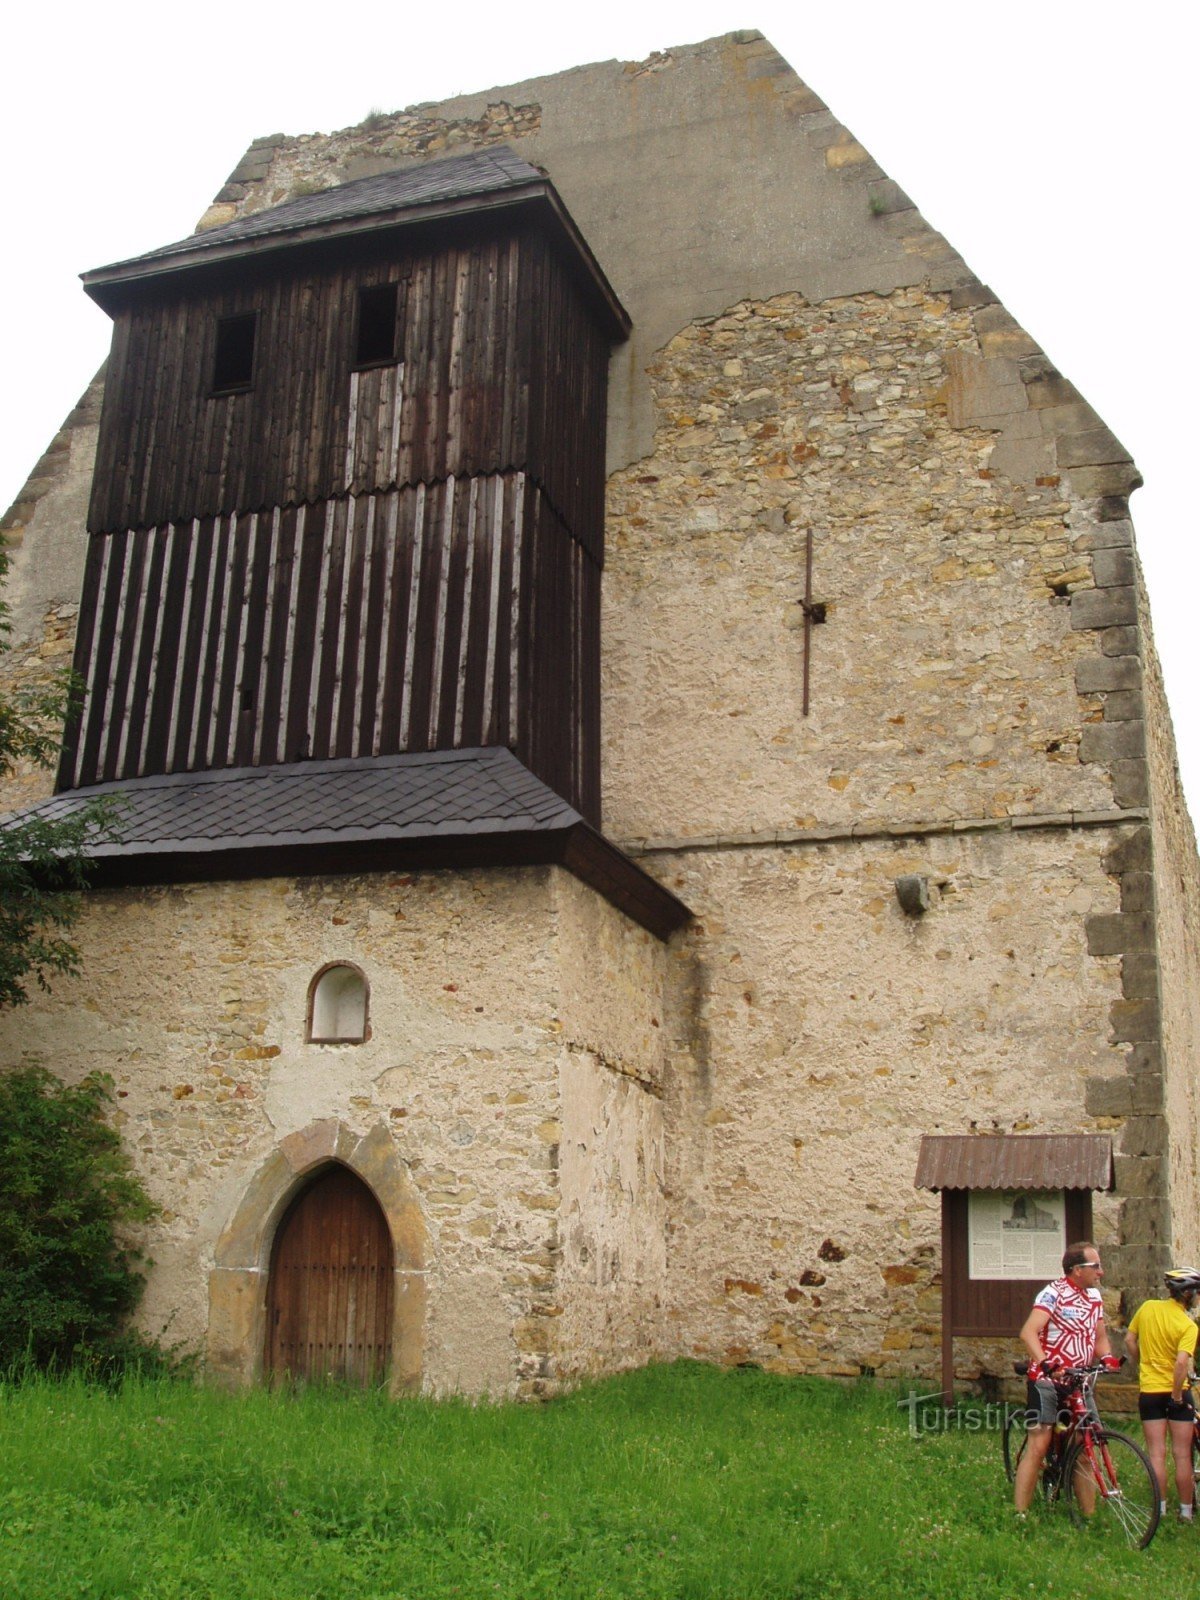 Remains of a monastery church with a belfry